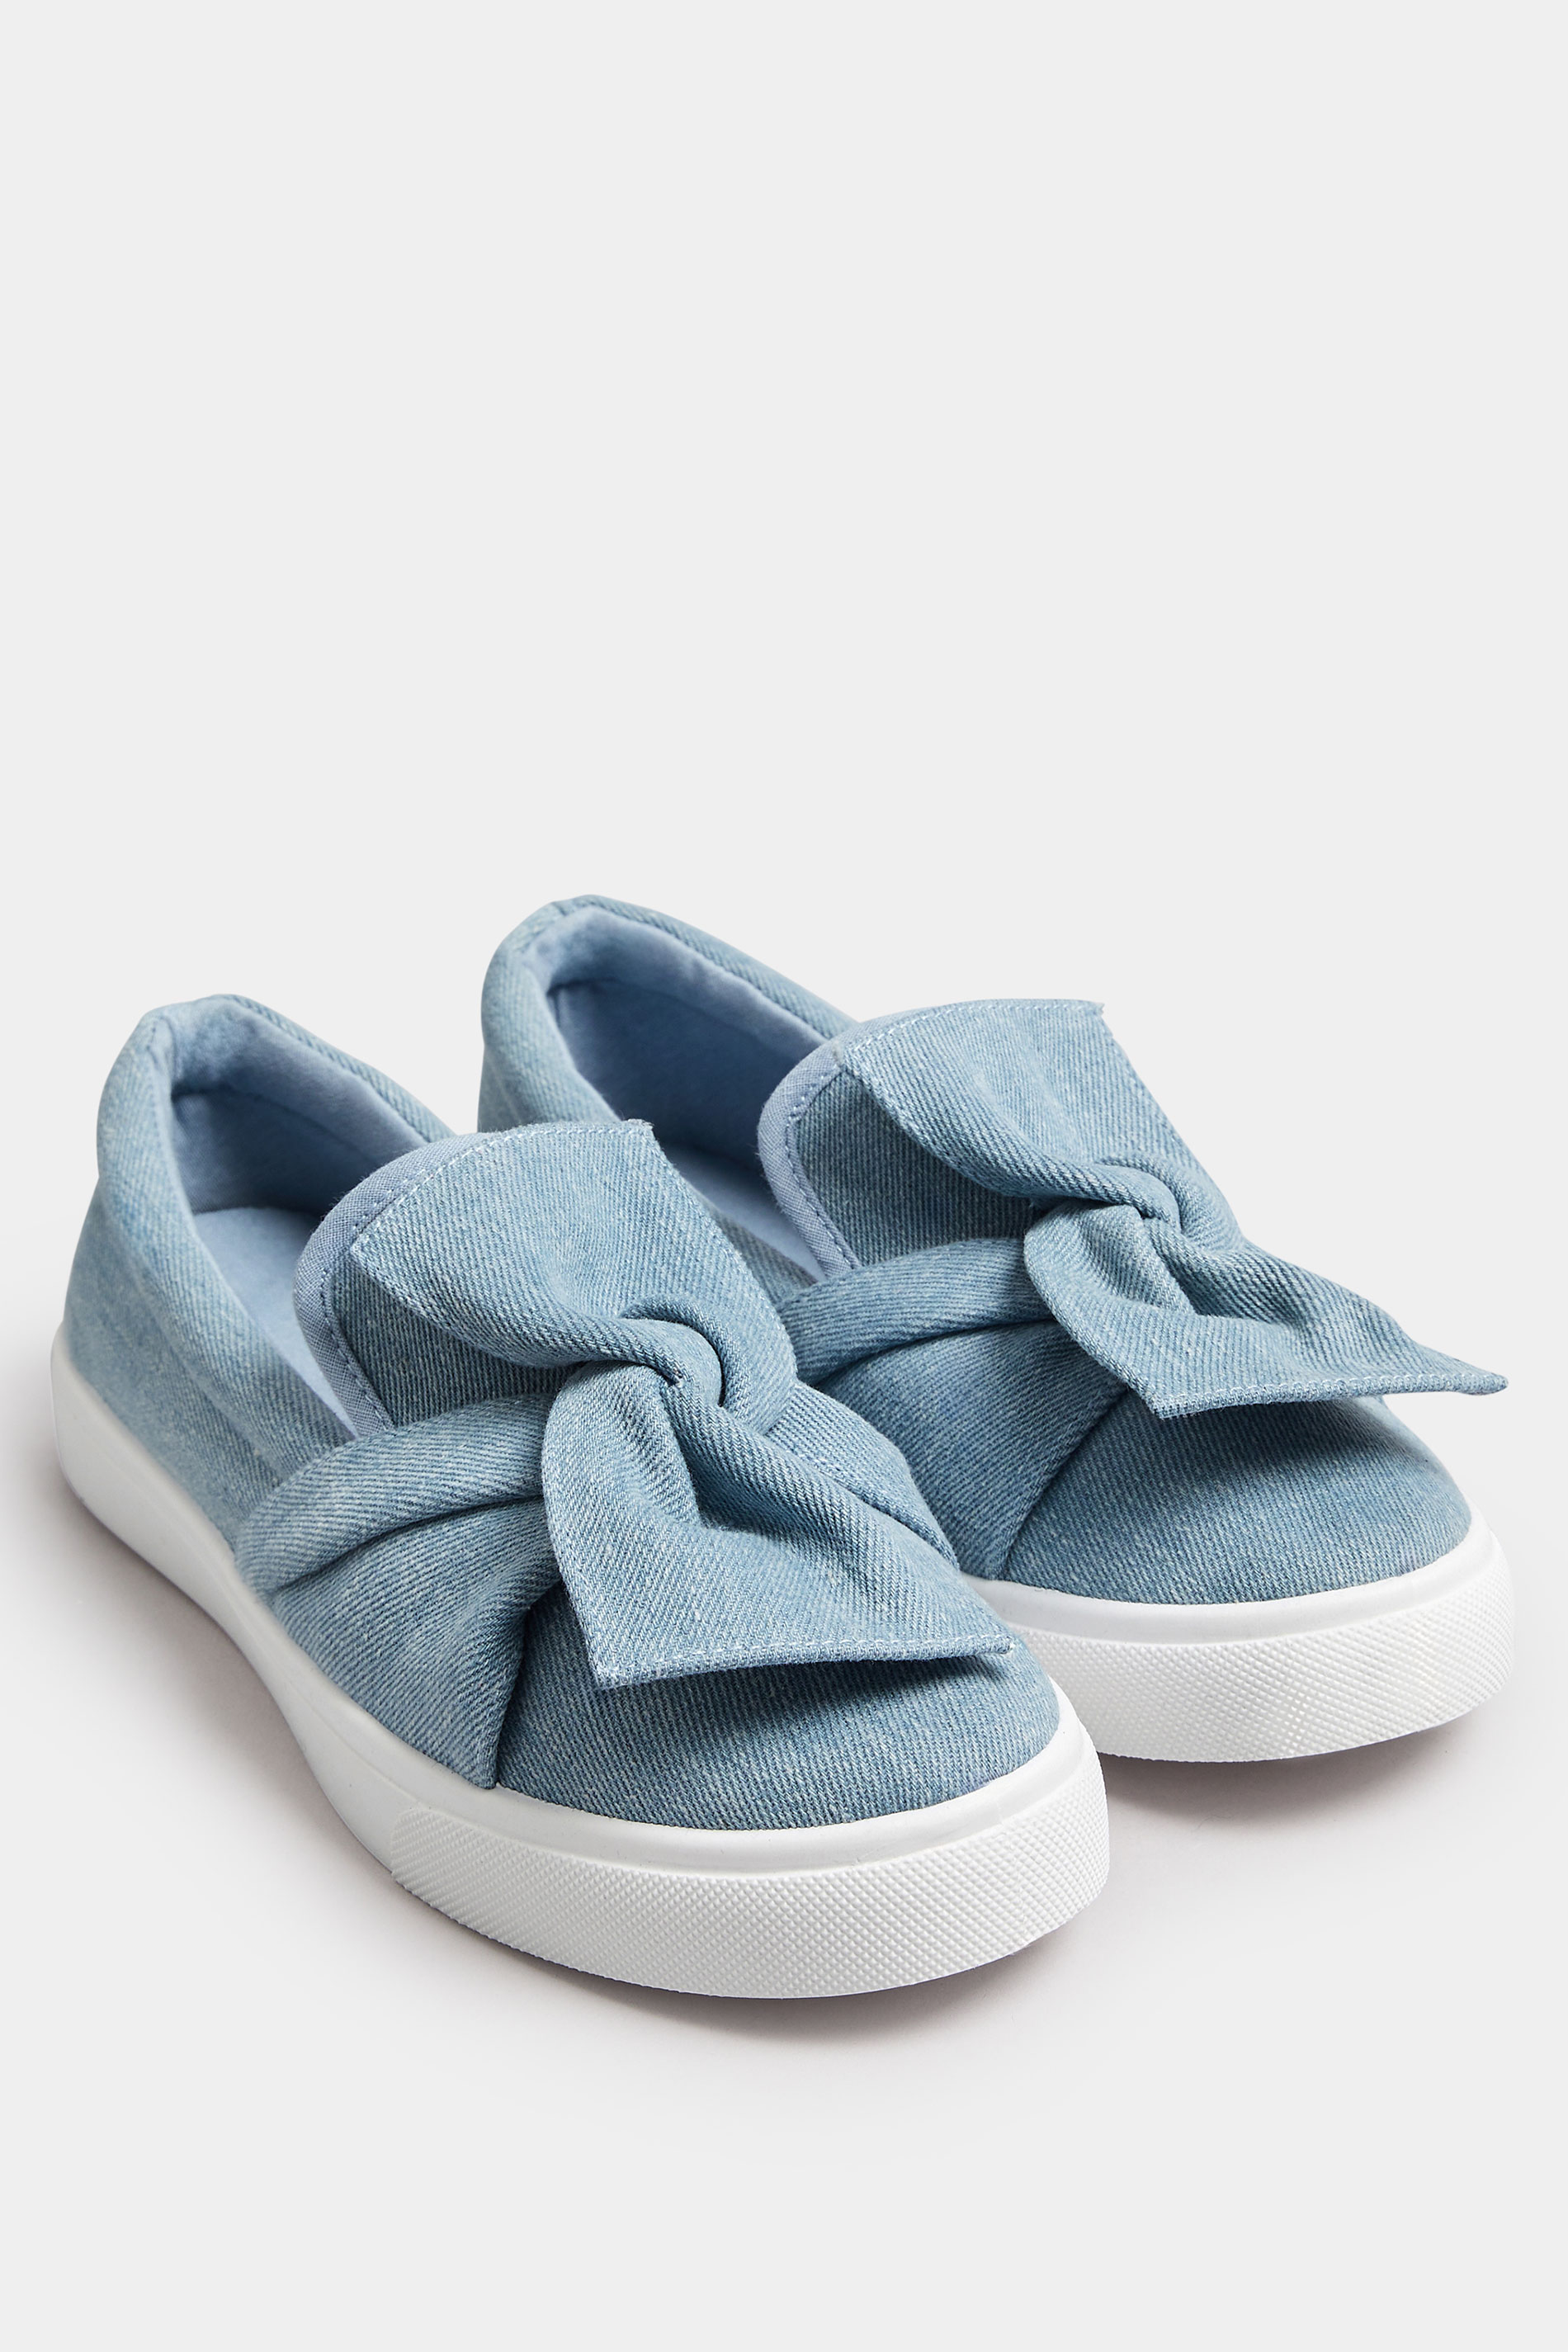 Blue Denim Twisted Bow Slip-On Trainers | Yours Clothing 2